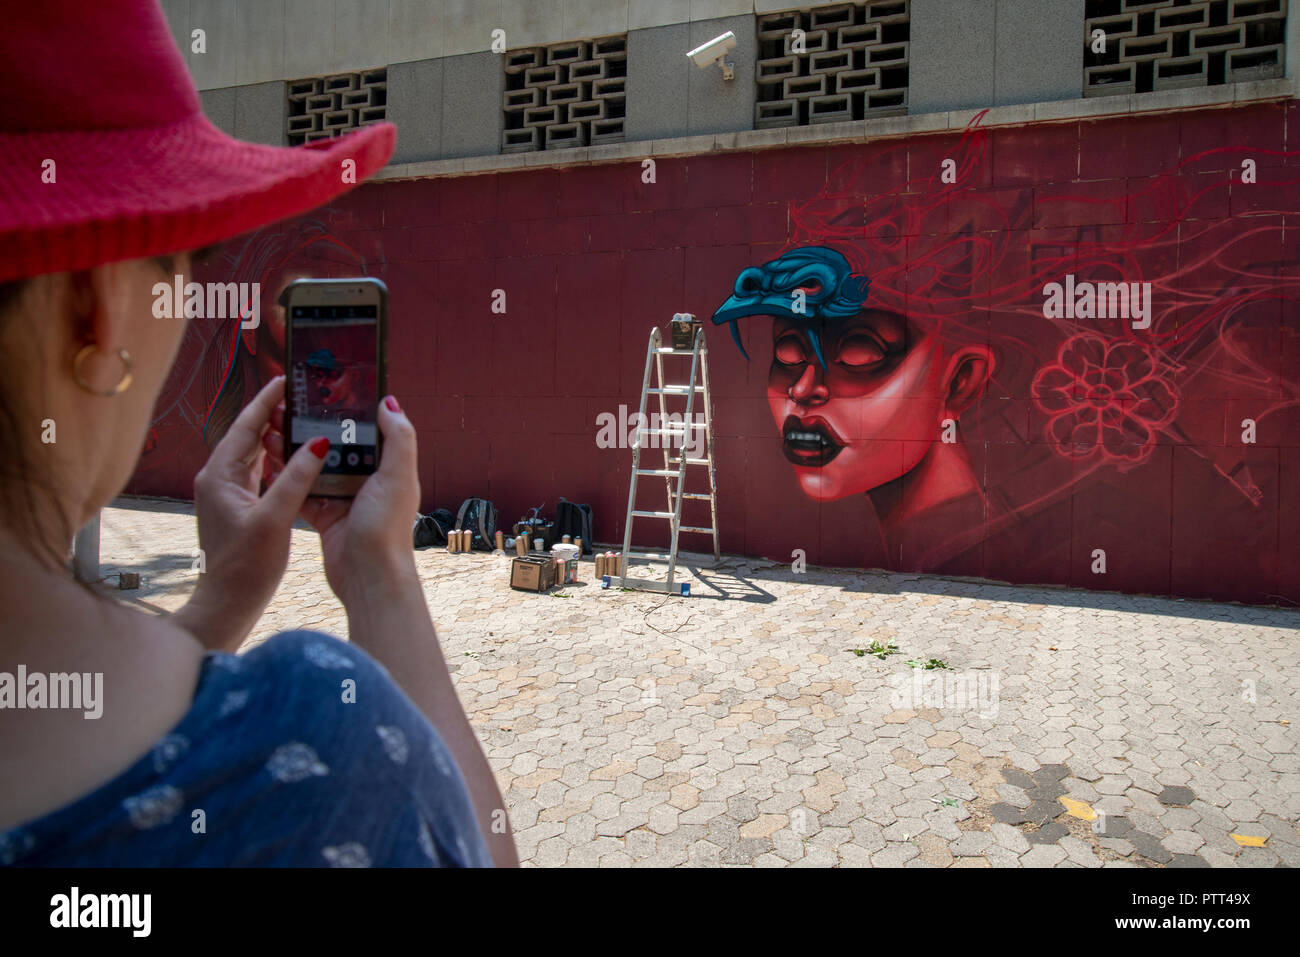 Johannesburg, South Africa, Oct. 10, 2018. A woman takes a picture with her mobile phone as the annual "City Of Gold" Urban Art Festival kicked off its graffiti street tour in Johannesburg today.  Labelled vandalism by some, the festival highlights the positive aspects of this art form and seeks to increase the appreciation for it among the general public.   These mural projects often enhance and activate sites in the Johannesburg inner-city area that are either forgotten or feared by the city's inhabitants, organizers said. Credit: Eva-Lotta Jansson/Alamy Live News Stock Photo